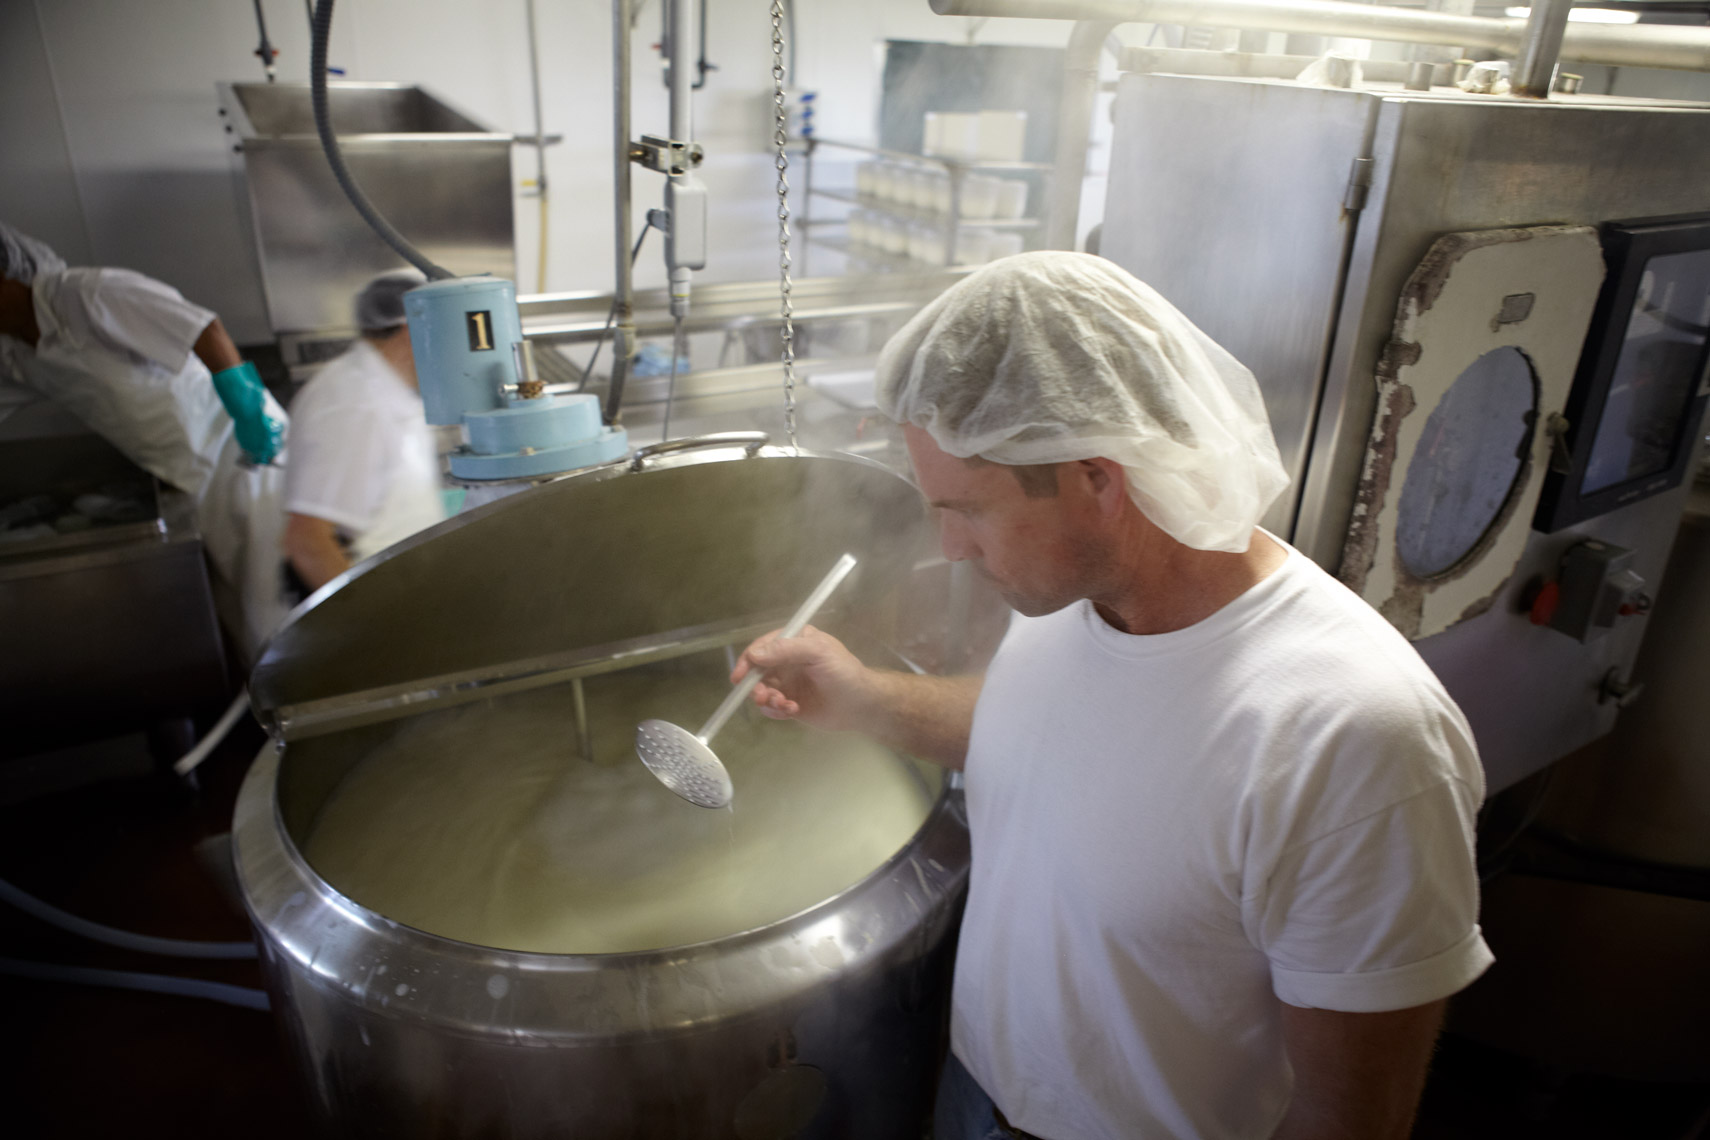 AlanCampbellPhotography, stiring the milk during cheesemaking